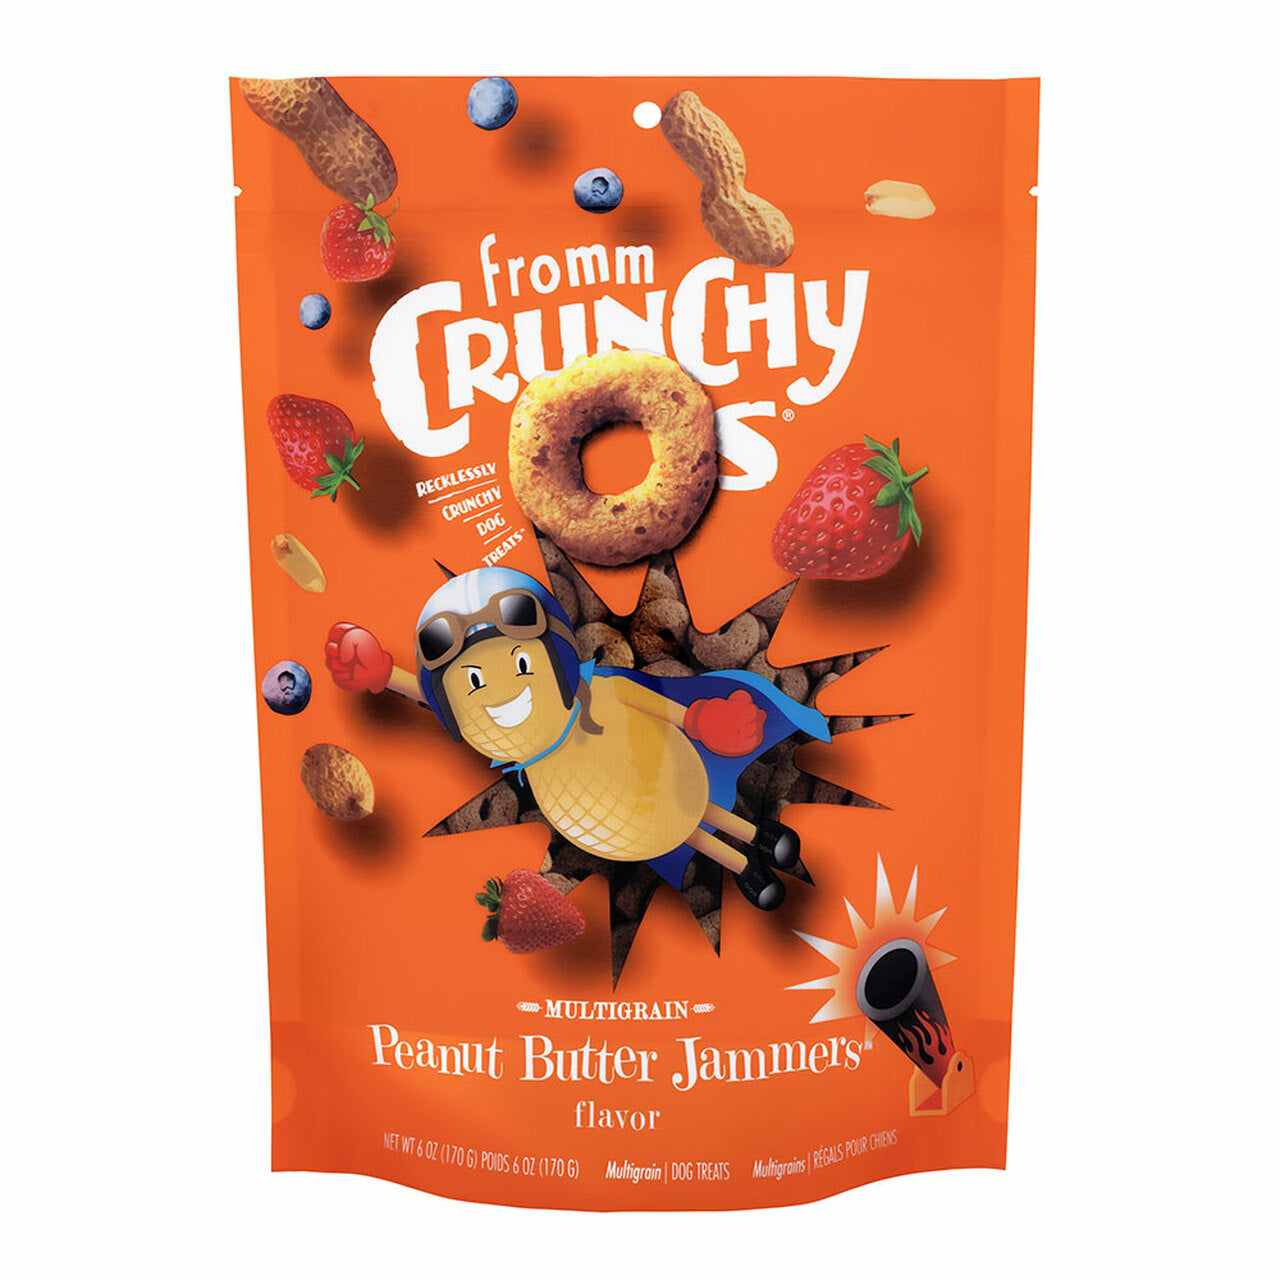 Fromm Crunchy O's Peanut Butter Jammers 6 oz.